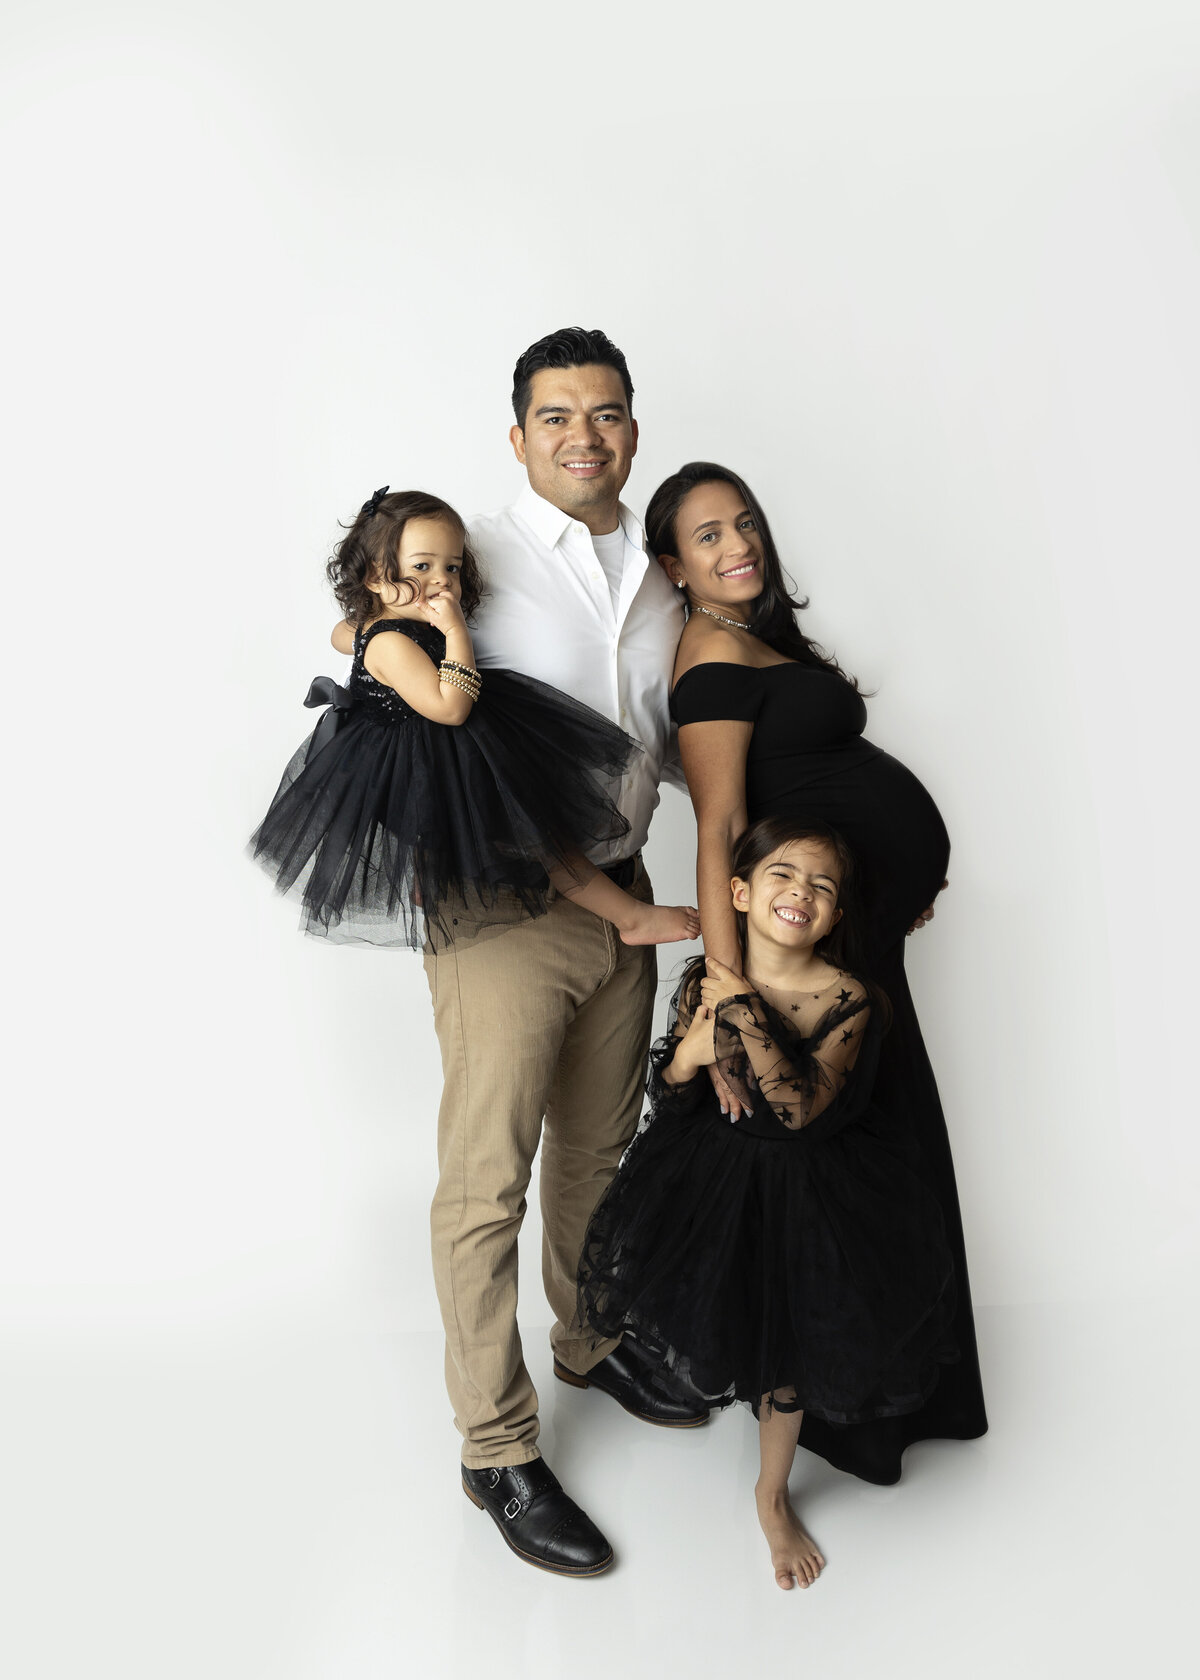 An expecting mother stands in a studio with leaning on her husband with their two toddler daughters in matching black dresses